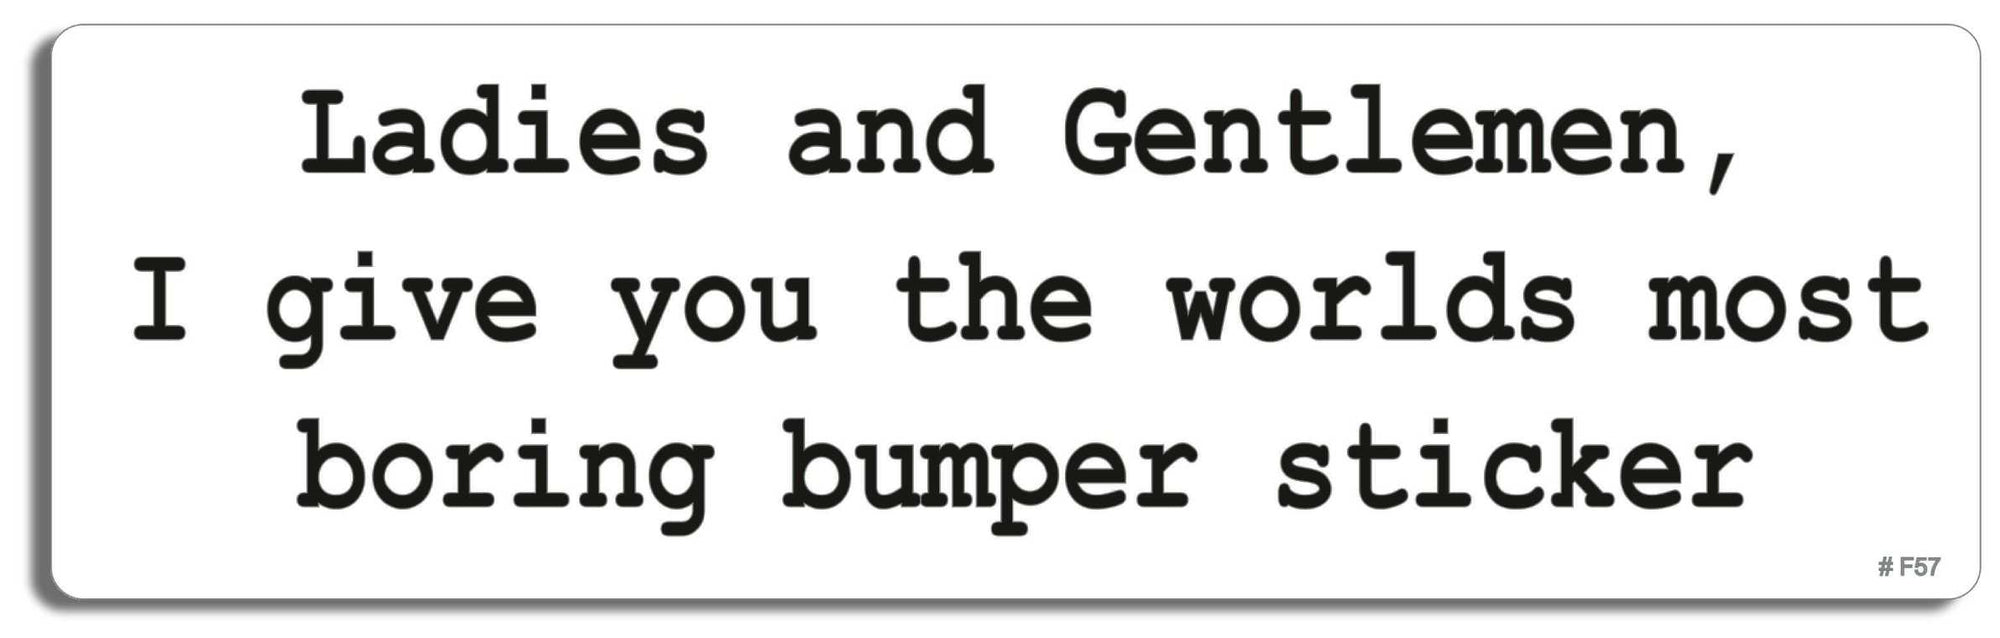 Ladies & Gentlemen, I give you the worlds most boring bumper Sticker- - 3" x 10" Bumper Sticker--Car Magnet- -  Decal Bumper Sticker-funny Bumper Sticker Car Magnet Ladies & Gentlemen, I give you the-  Decal for cars funny, funny quote, funny saying